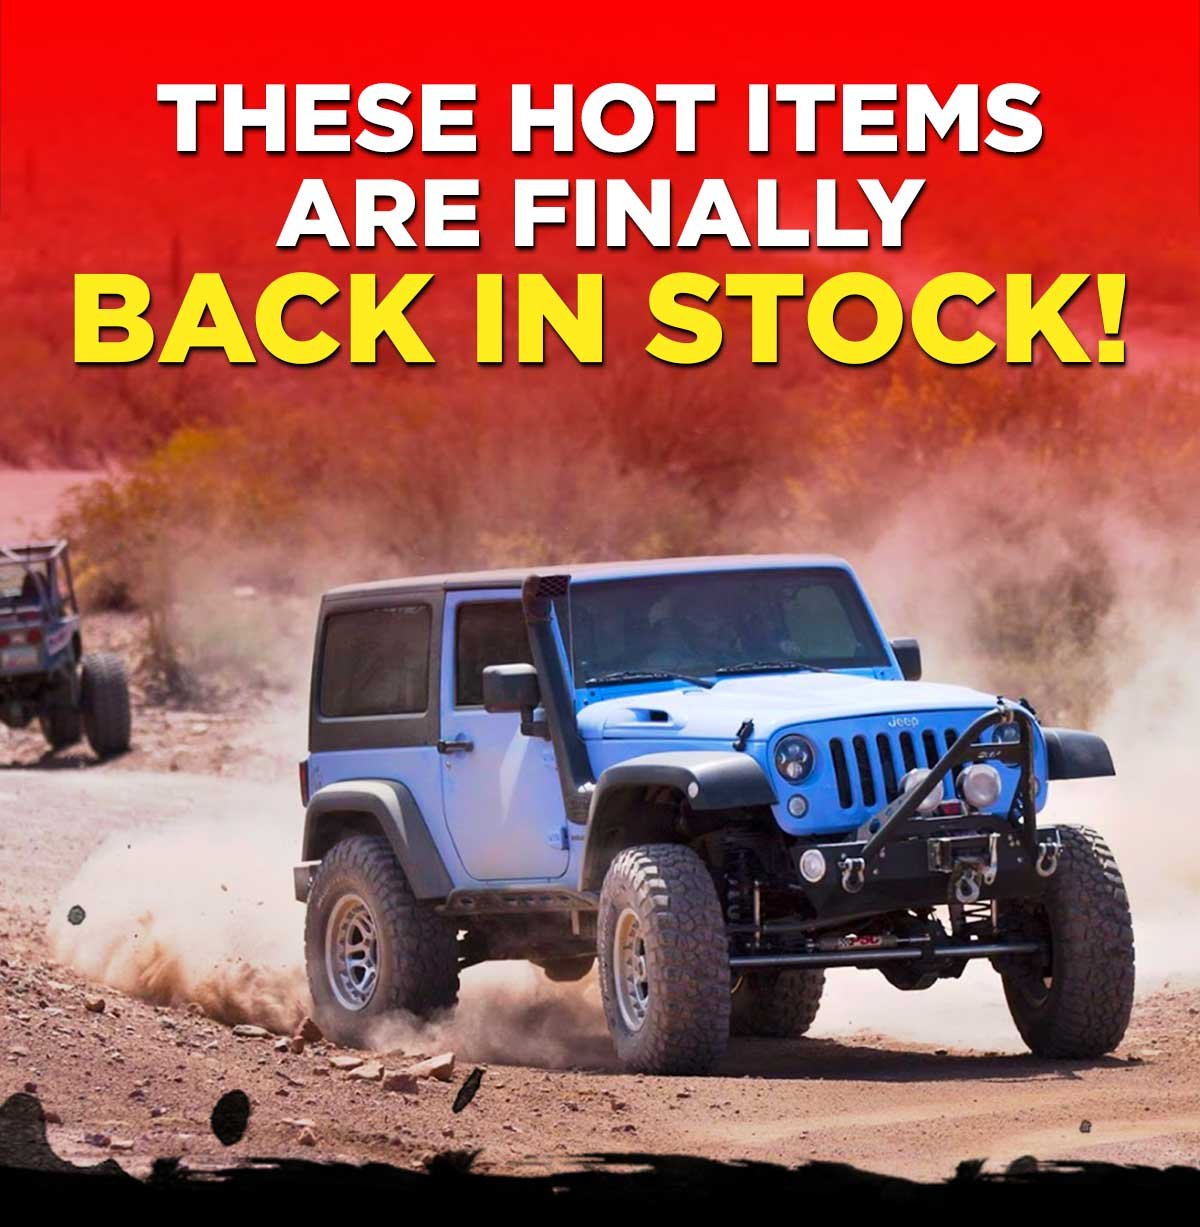 These Hot Items Are Finally Back In Stock!